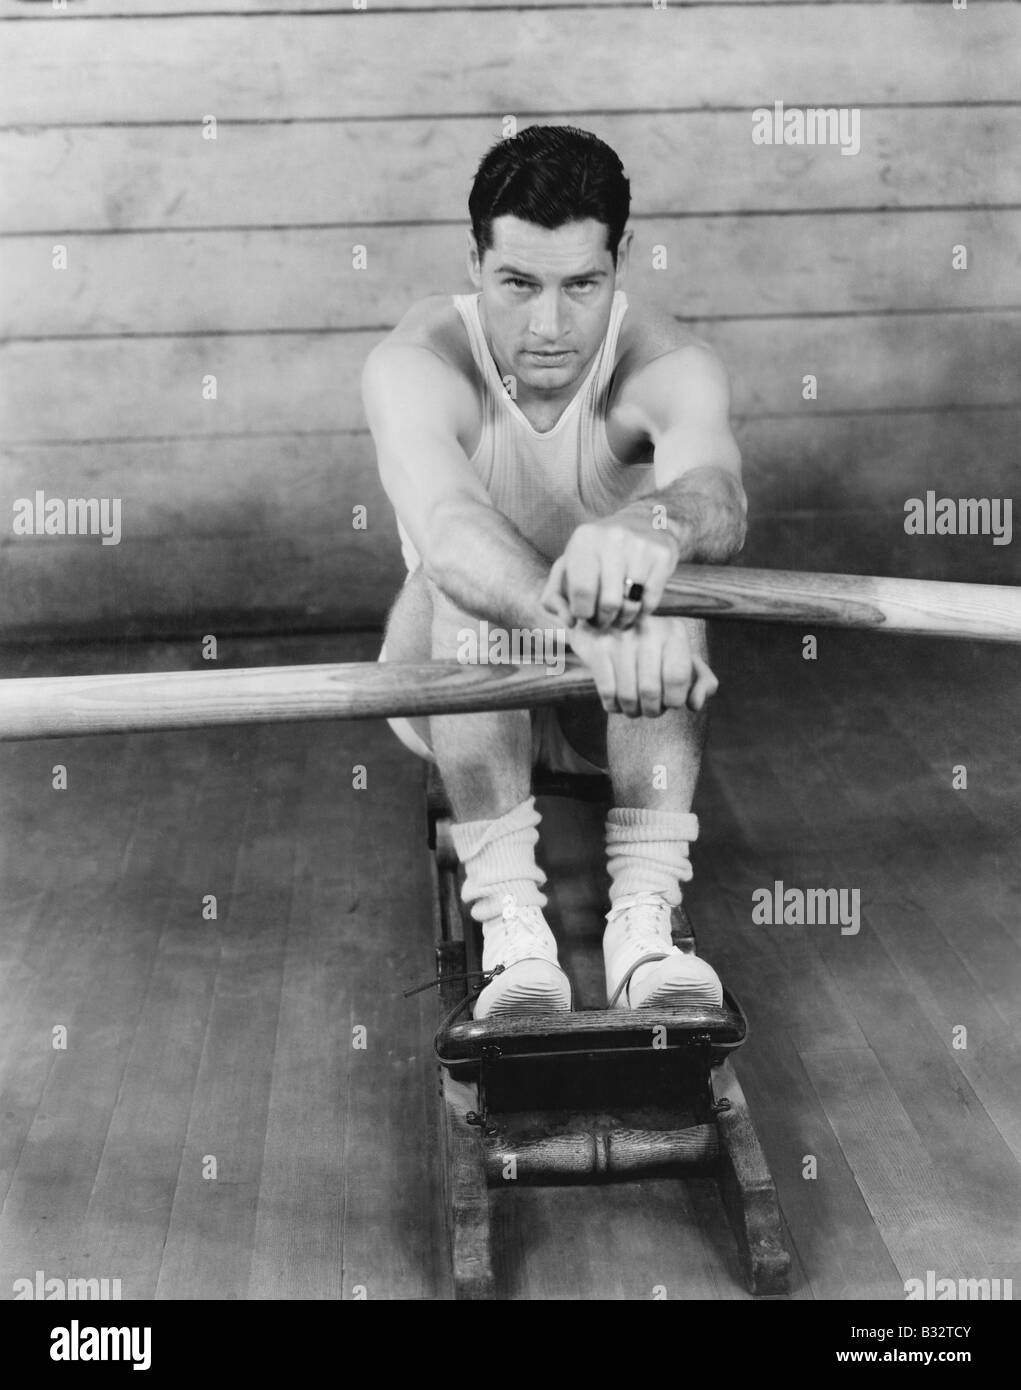 Portrait of a young man exercising on a rowing machine Stock Photo